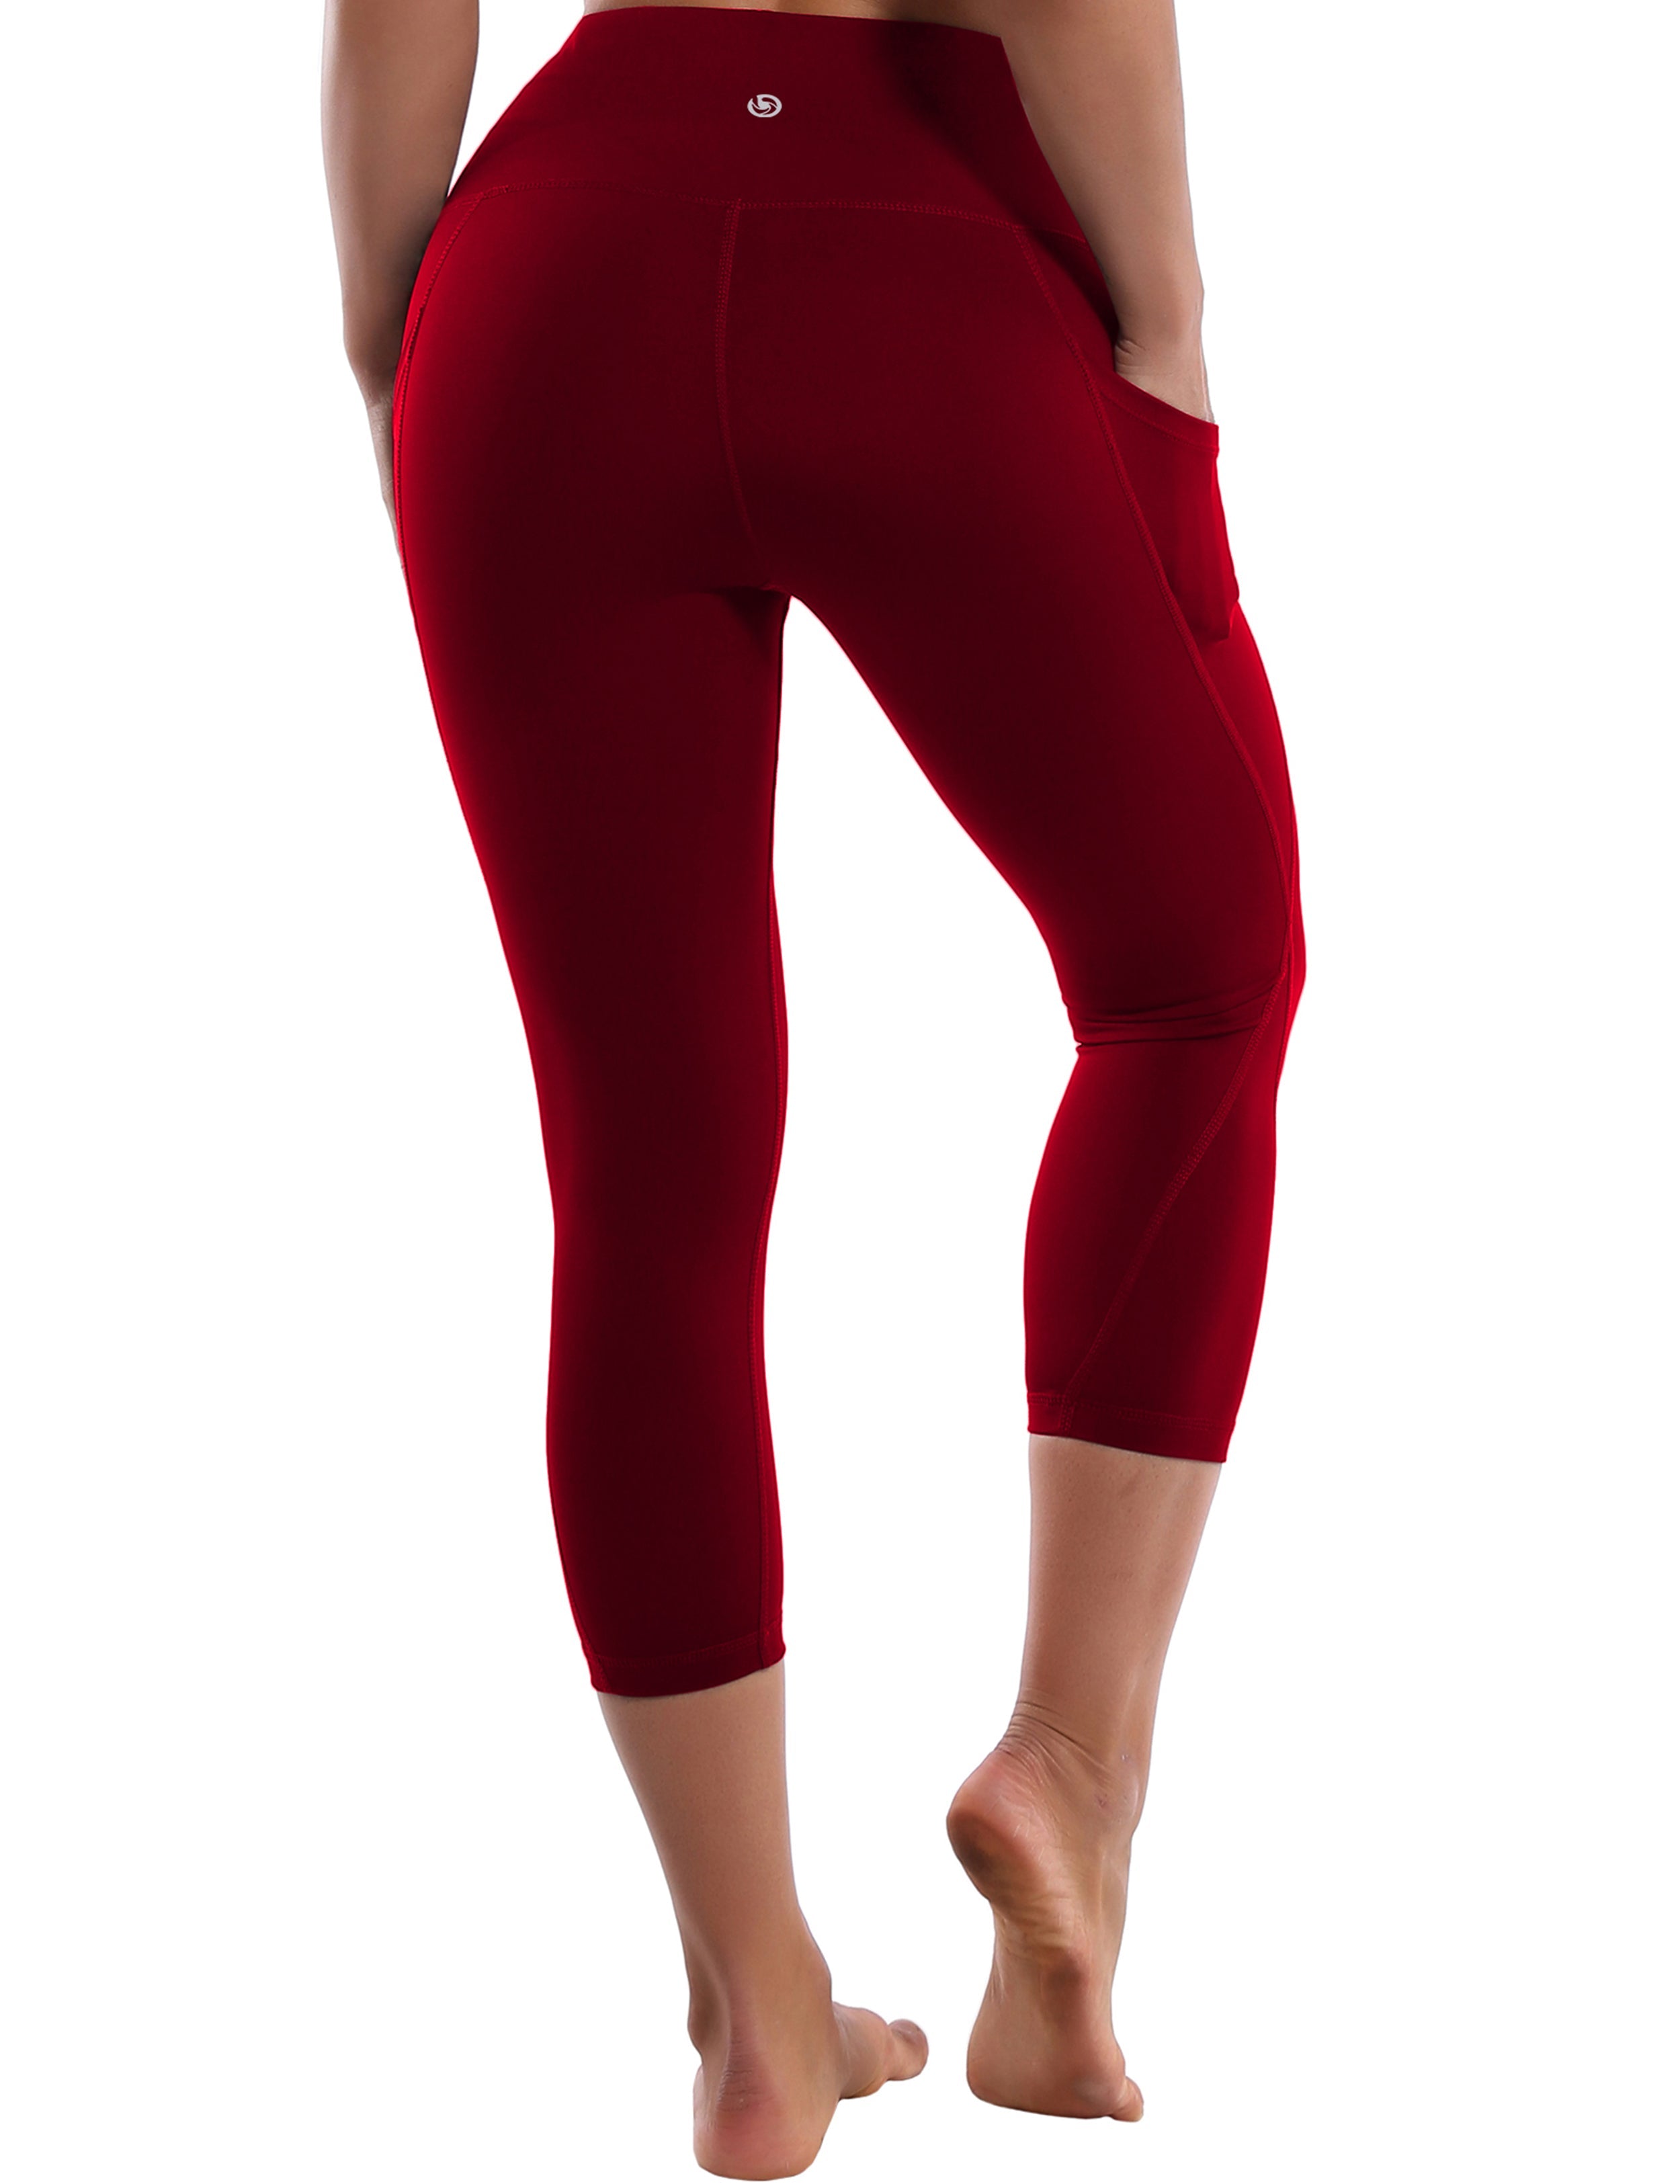 19" High Waist Side Pockets Capris cherryred 75%Nylon/25%Spandex Fabric doesn't attract lint easily 4-way stretch No see-through Moisture-wicking Tummy control Inner pocket